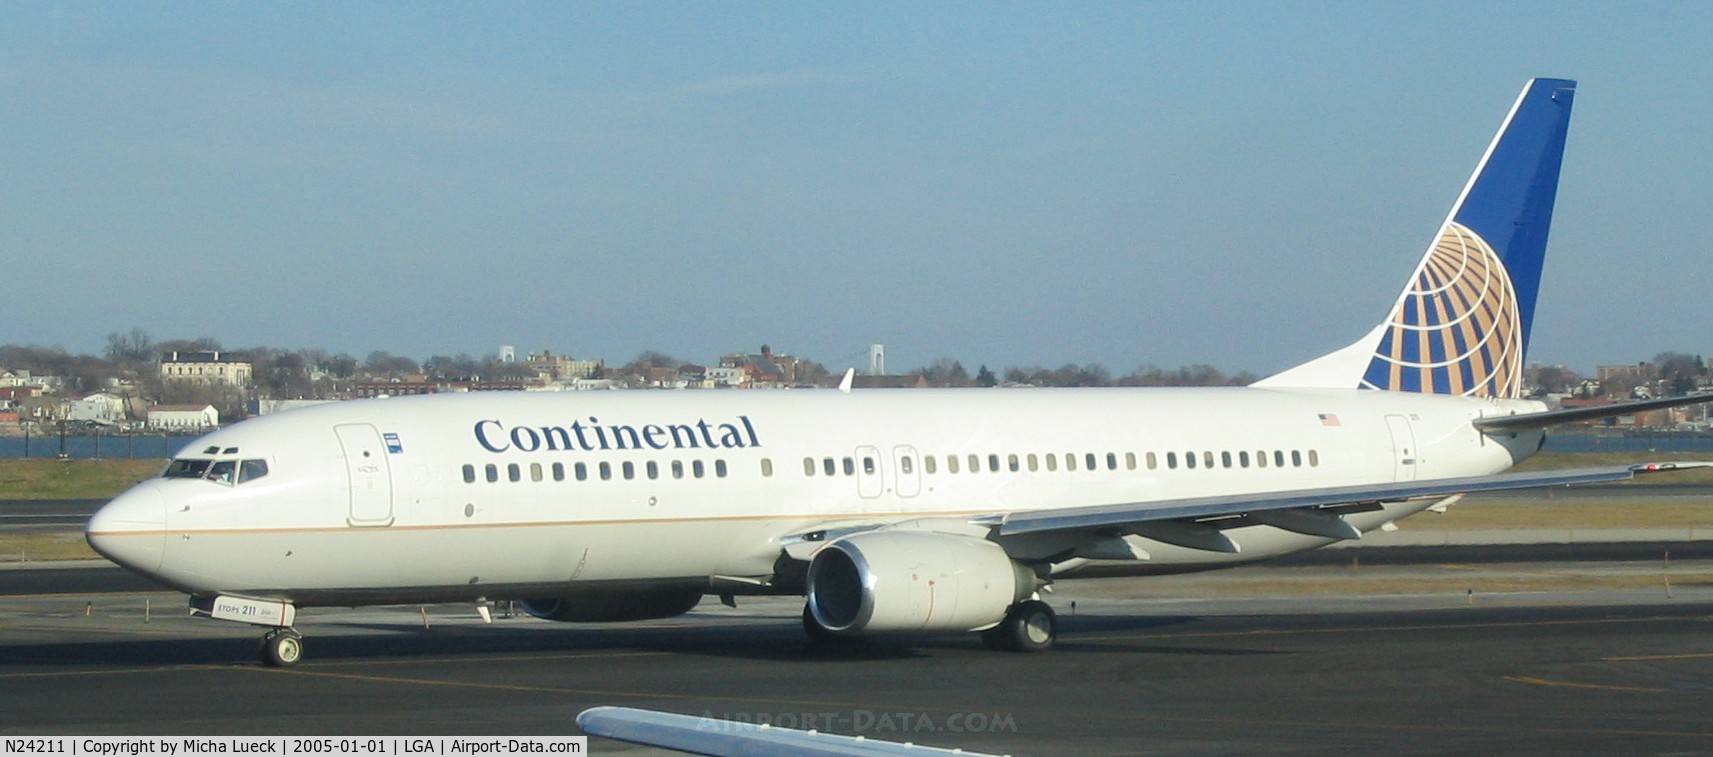 N24211, 1998 Boeing 737-824 C/N 28771, Greeting the New Year in New York City